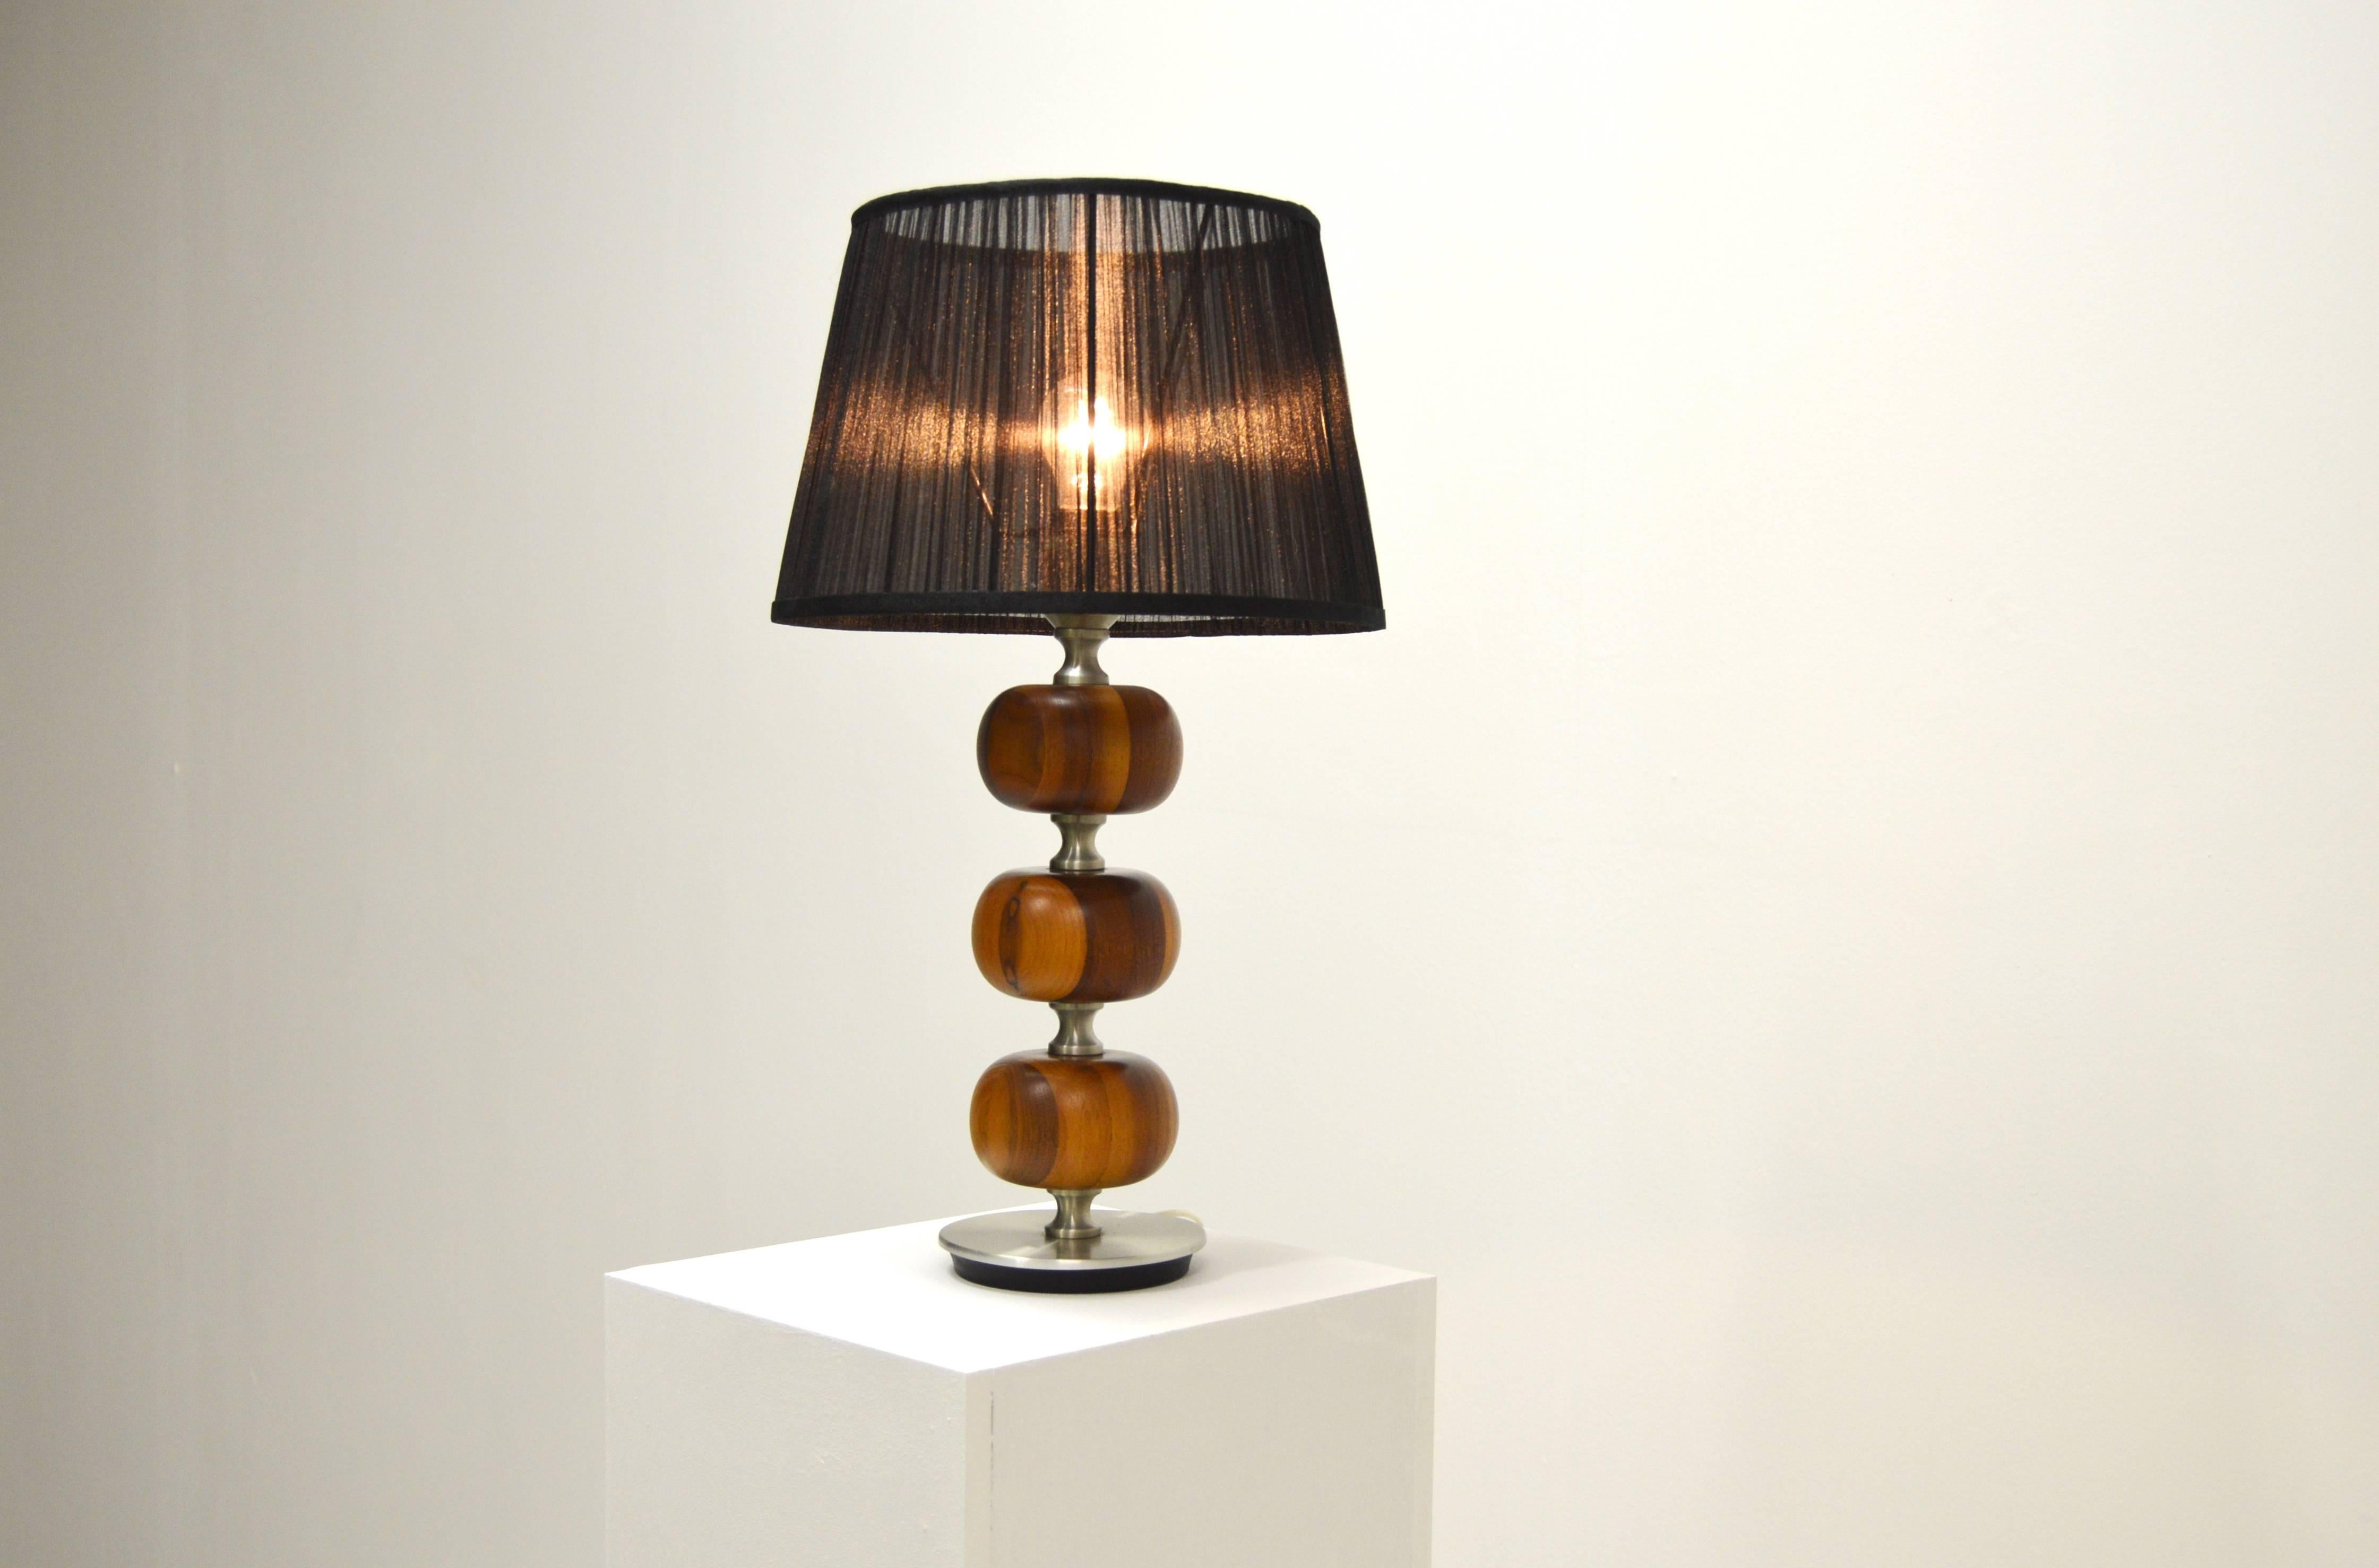 A beautiful table lamp by Henrik Blomqvist.
Made from bulbuous mahogany and aluminium.

The lampshade is new and the lamp is best to be sent in a box without lampshade for more economic and fast shipment.
Height below is given without the